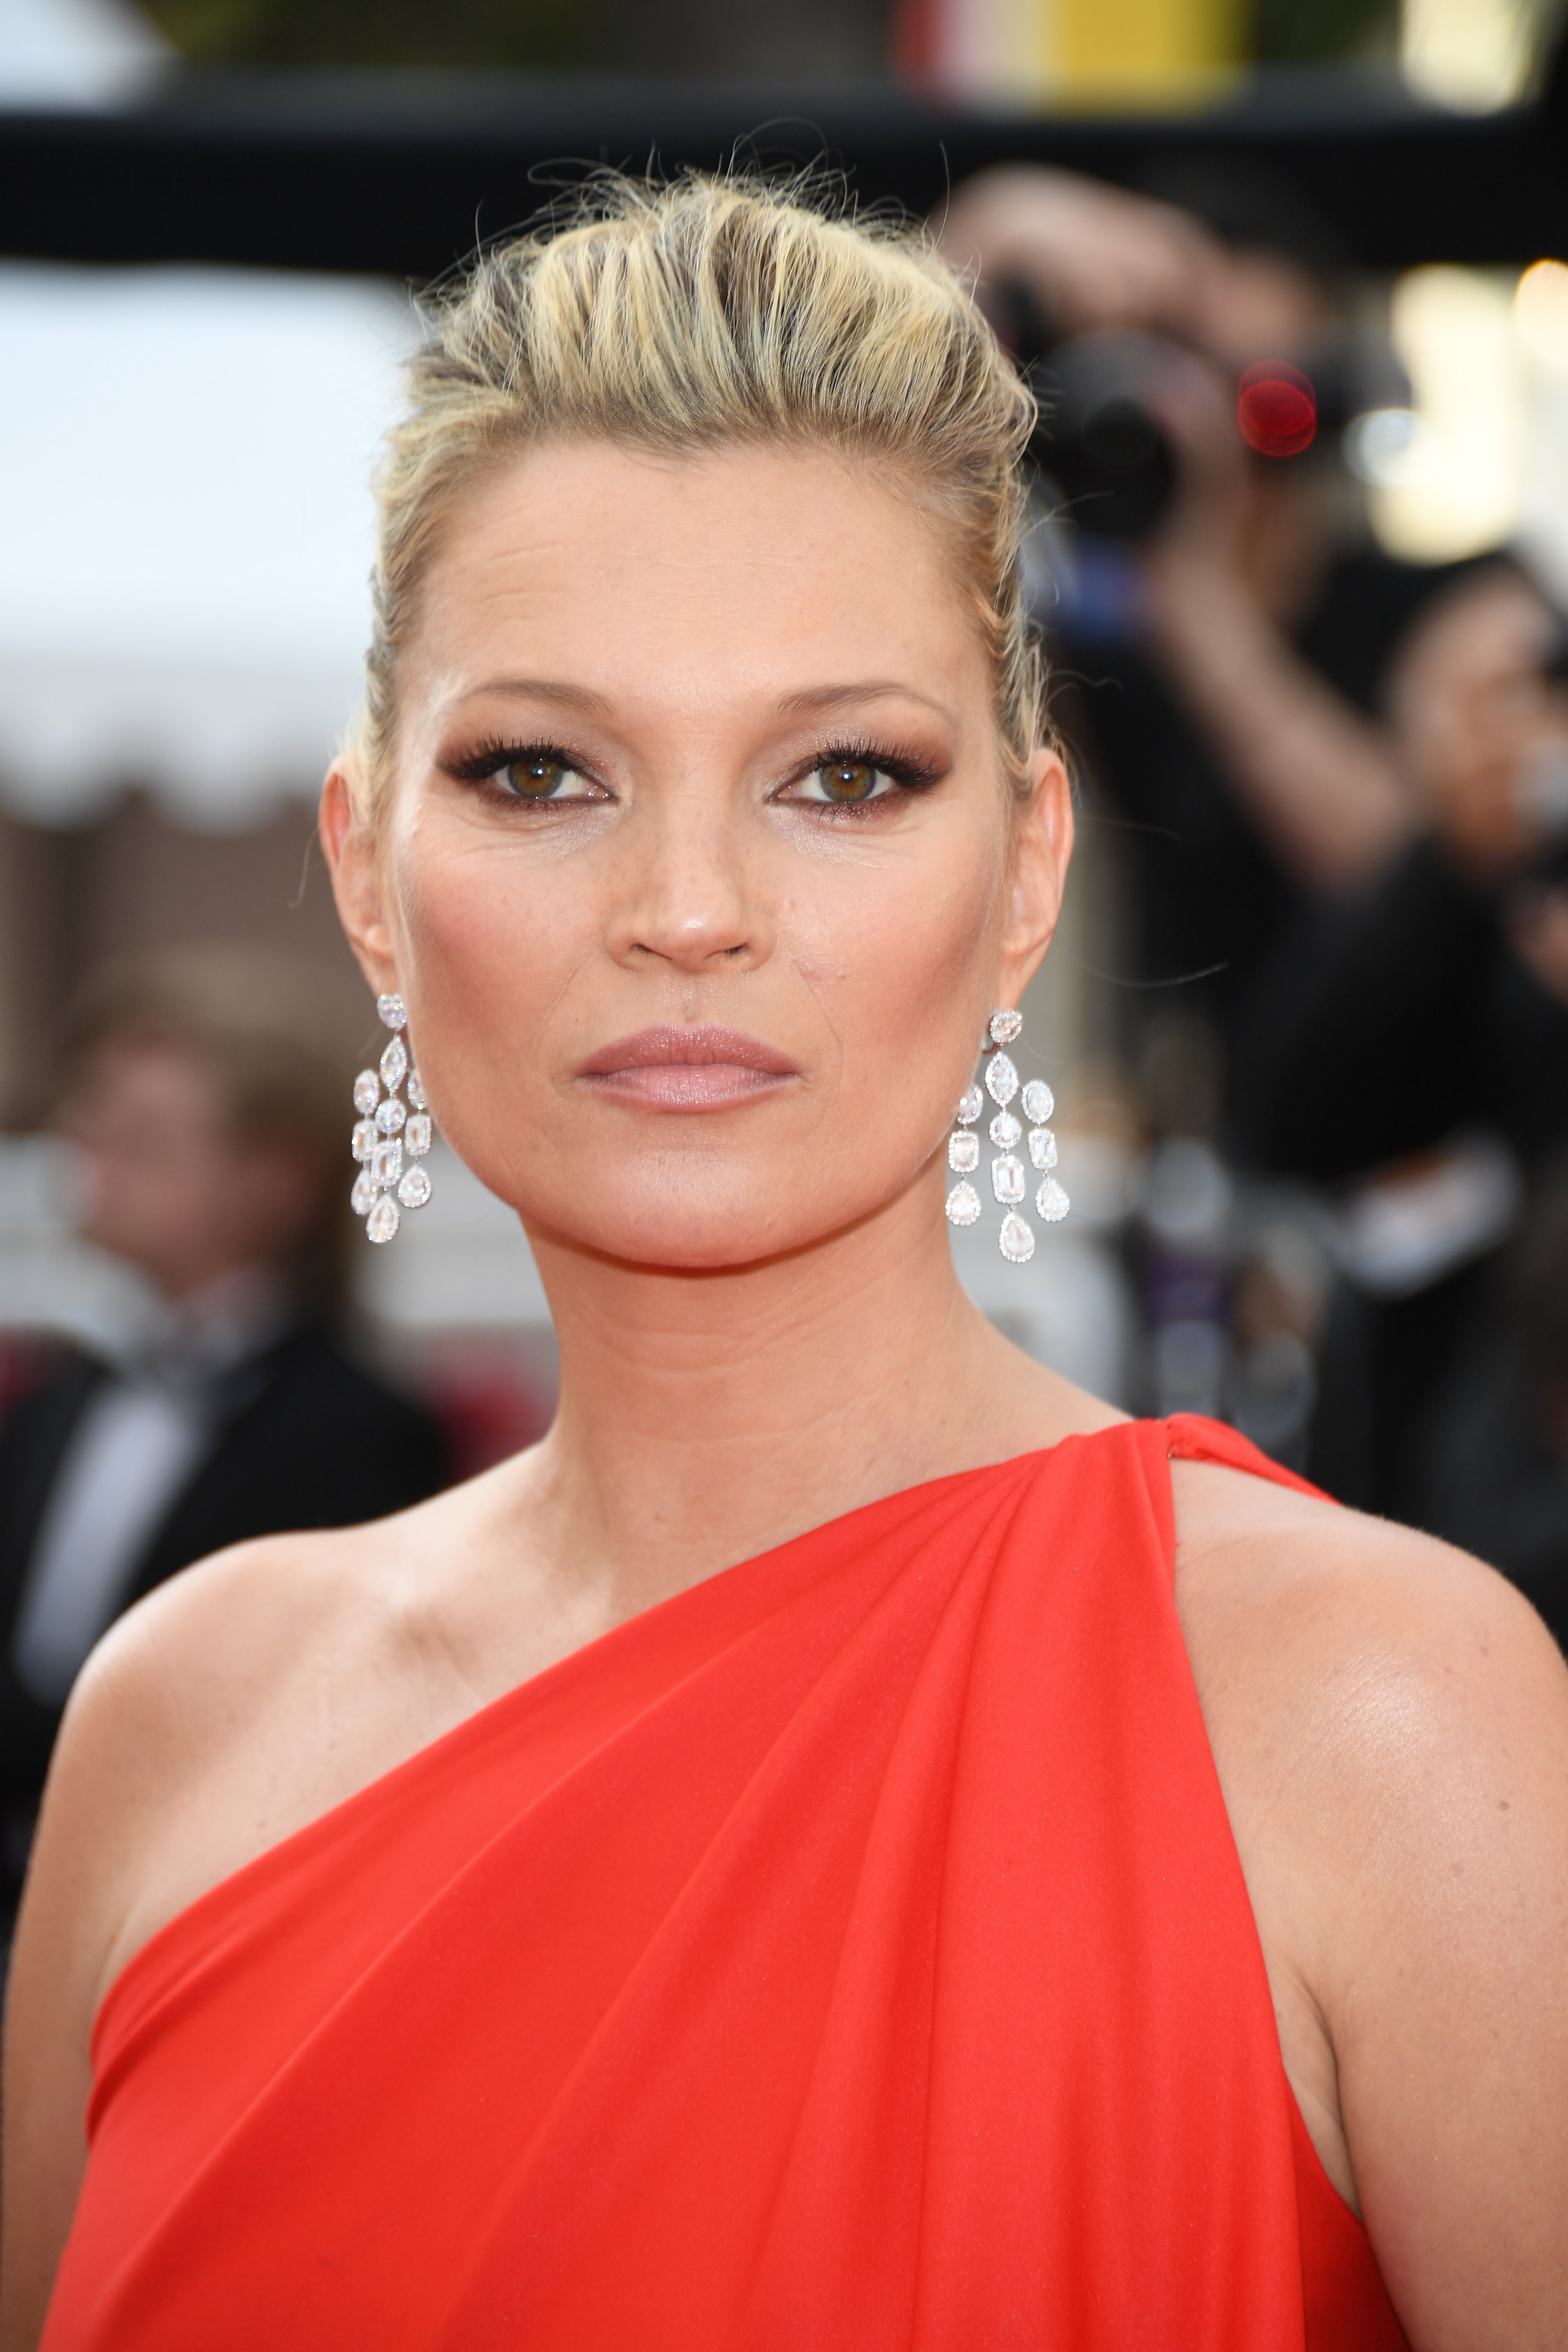 CANNES, FRANCE - MAY 16:  Model Kate Moss attends the 'Loving' premiere during the 69th annual Cannes Film Festival at the Palais des Festivals on May 16, 2016 in Cannes, .  (Photo by Venturelli/WireImage) (Foto: WireImage)